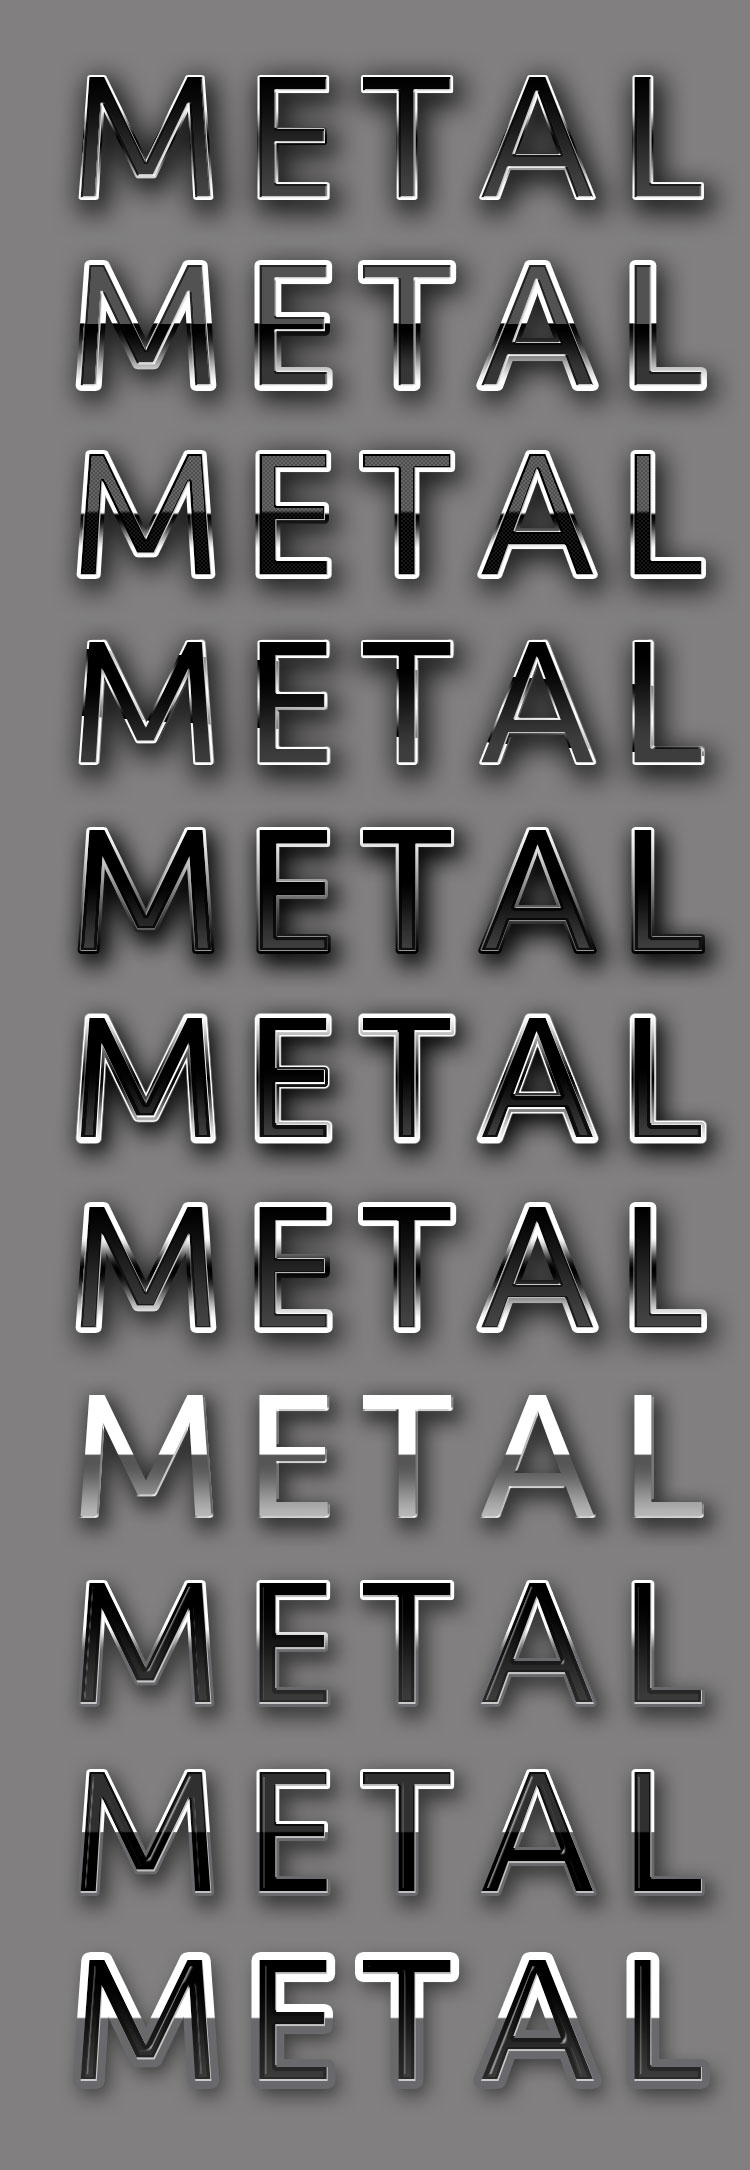 Metaal PS Photoshop Font Style